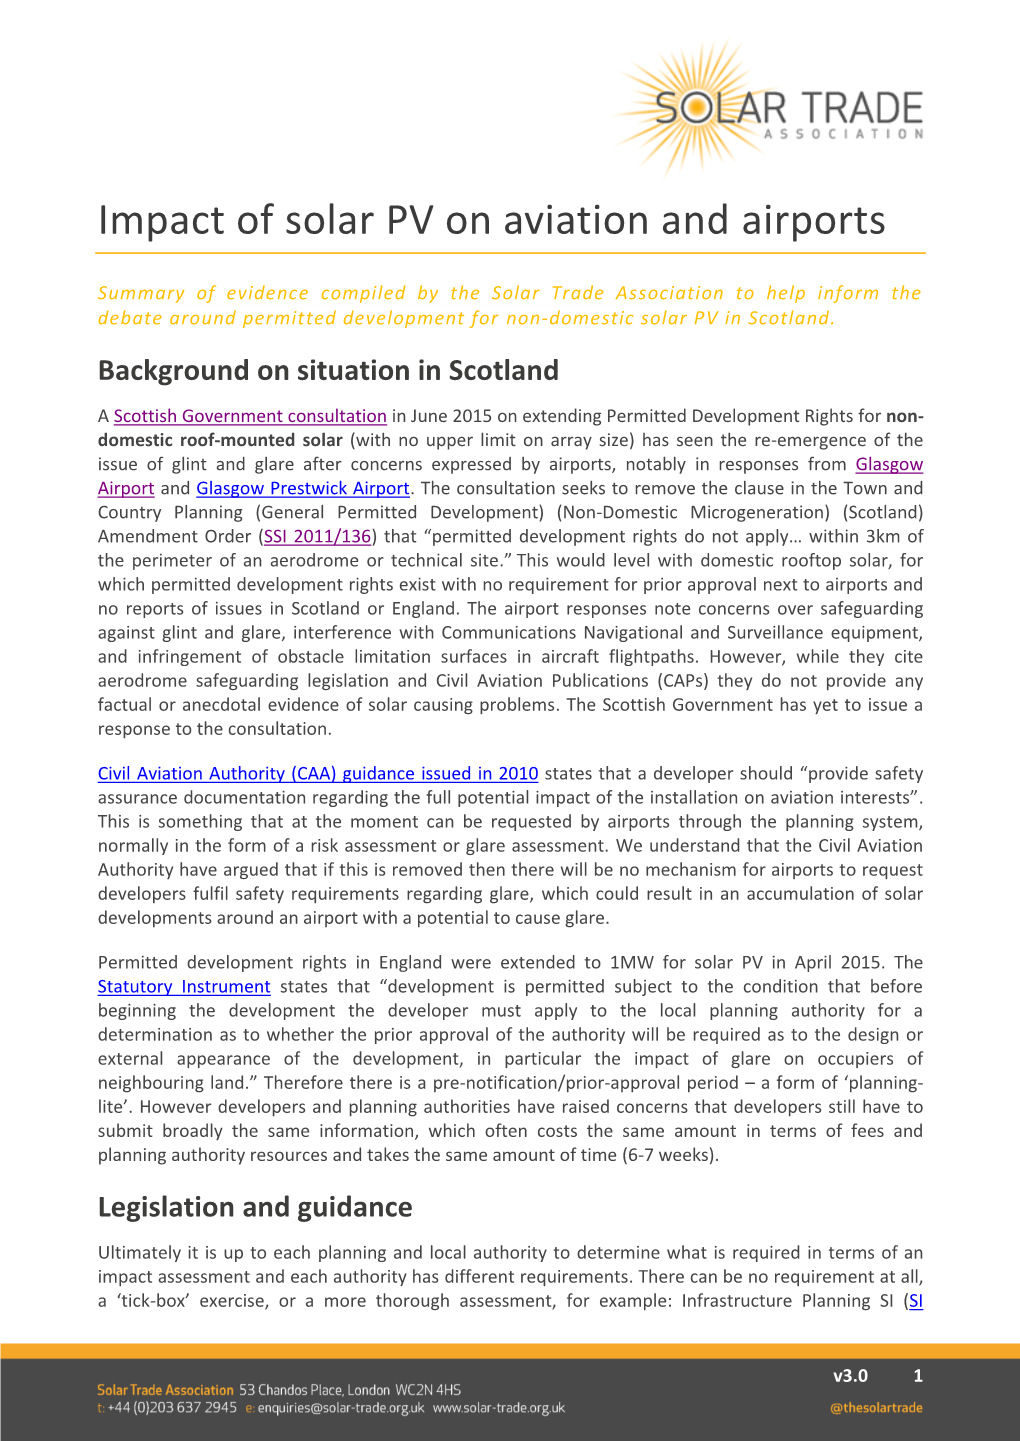 Impact of Solar PV on Aviation and Airports